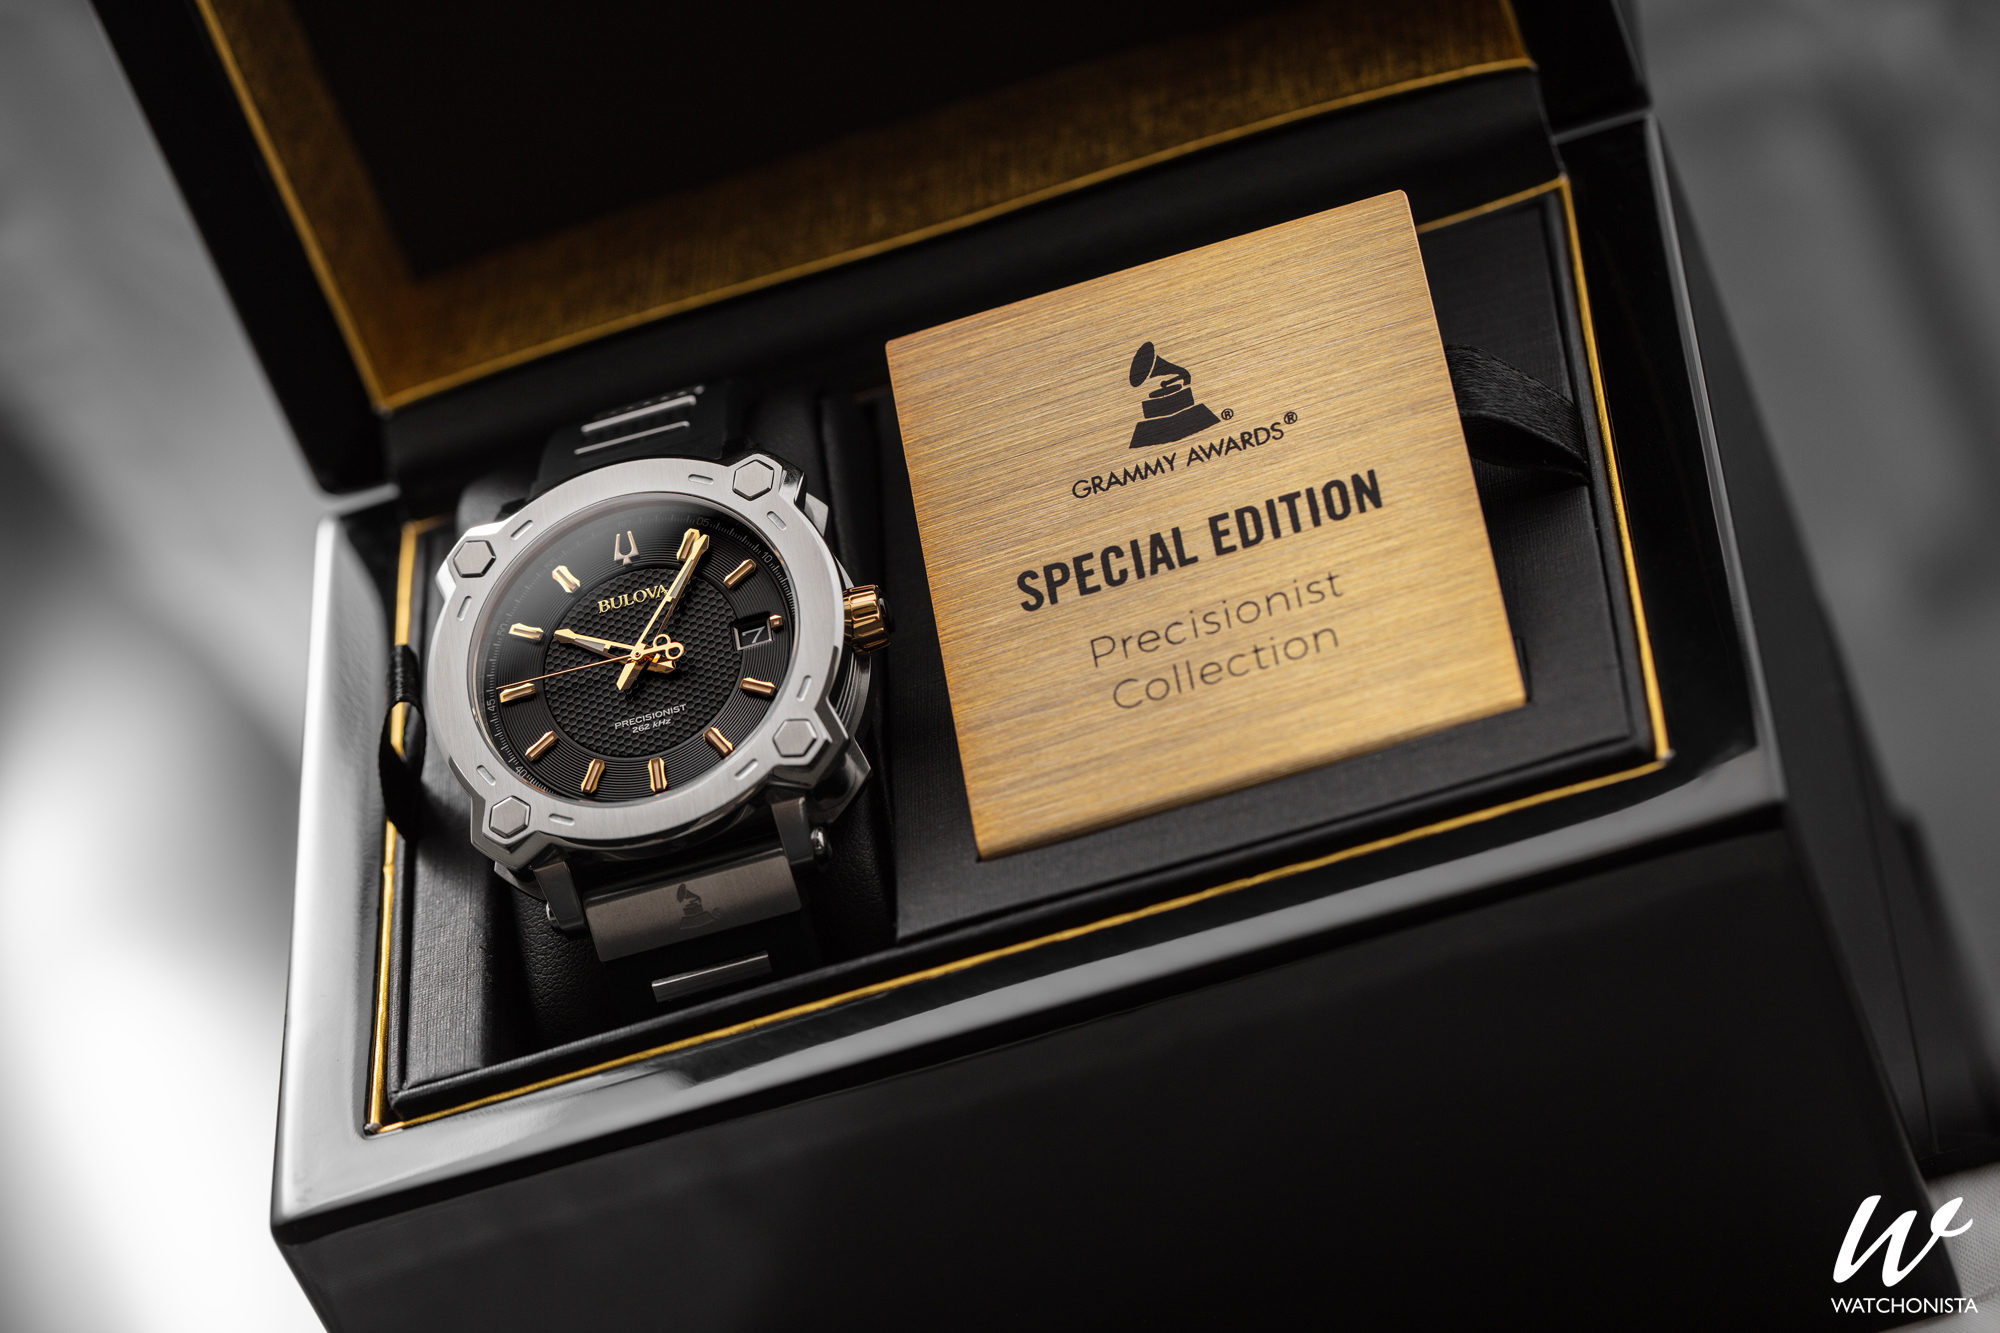 Hot Off The Presses, Hands-On With The Bulova Special Edition GRAMMY